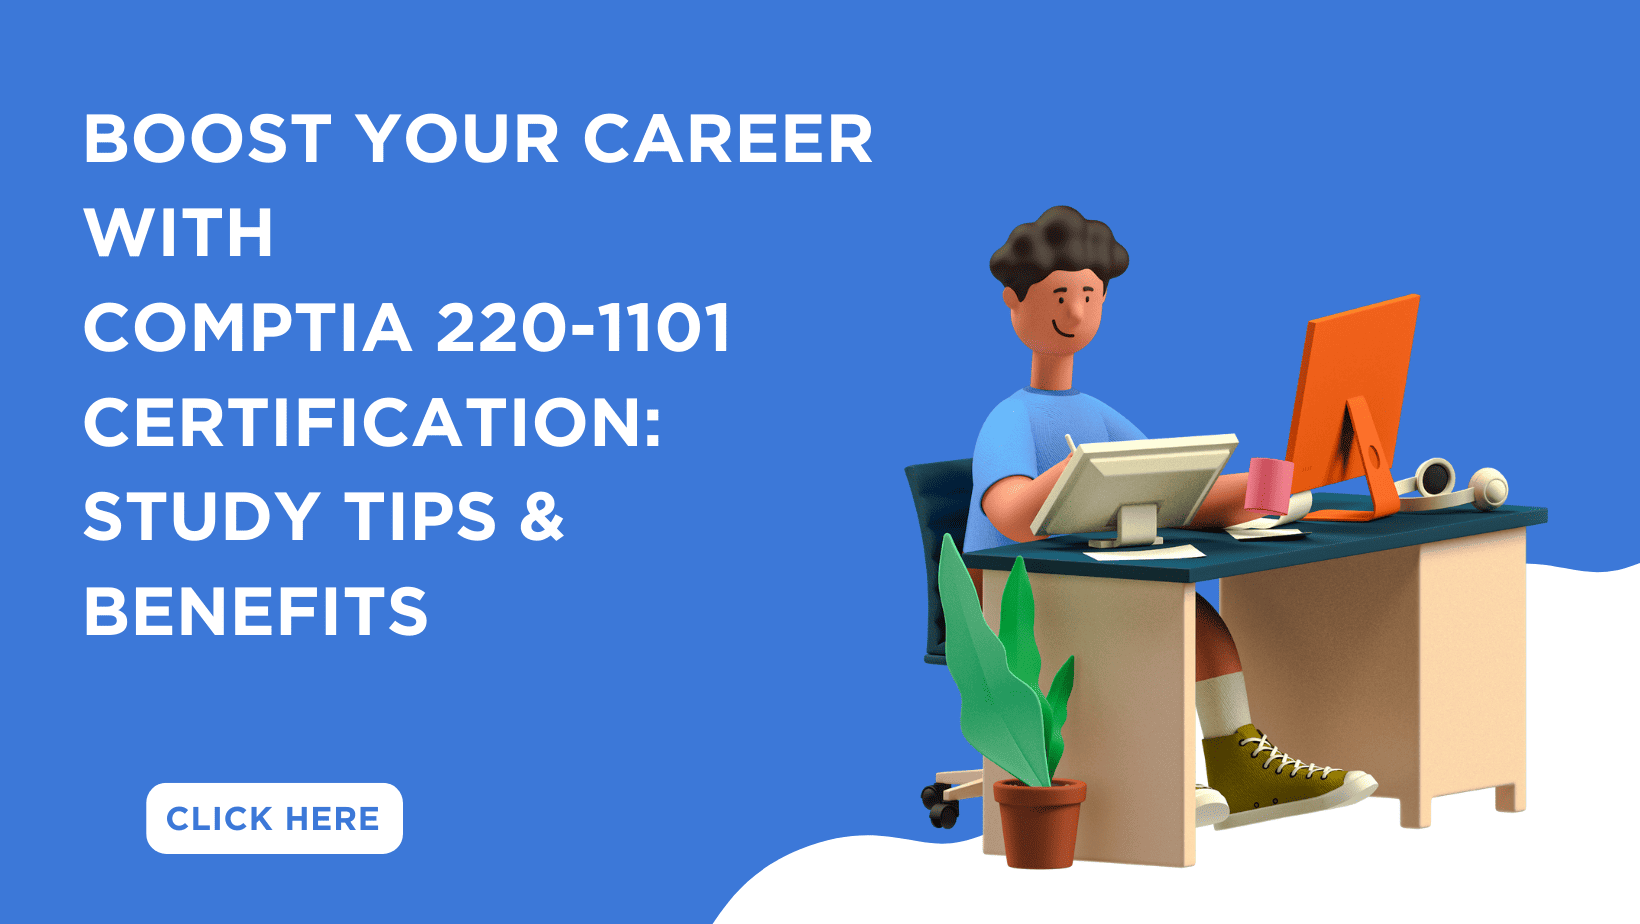 Ace the 220-1101 CompTIA A+ (Core 1) exam with practical study tips and practice tests. Boost your IT career with CompTIA certification!